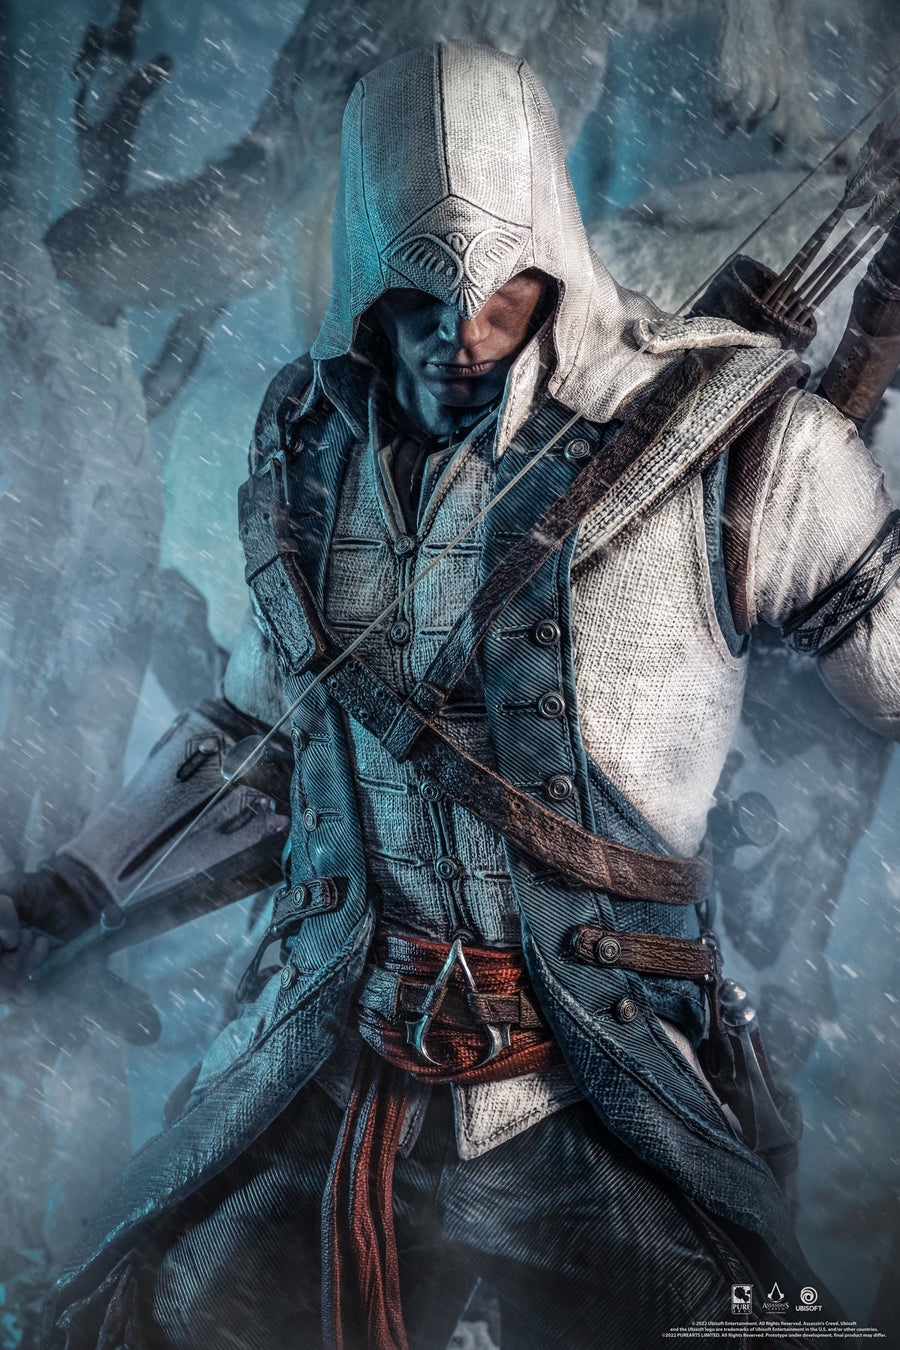 Assassin's Creed III Limited Edition Statue Connor Kenway Flag UBIsoft